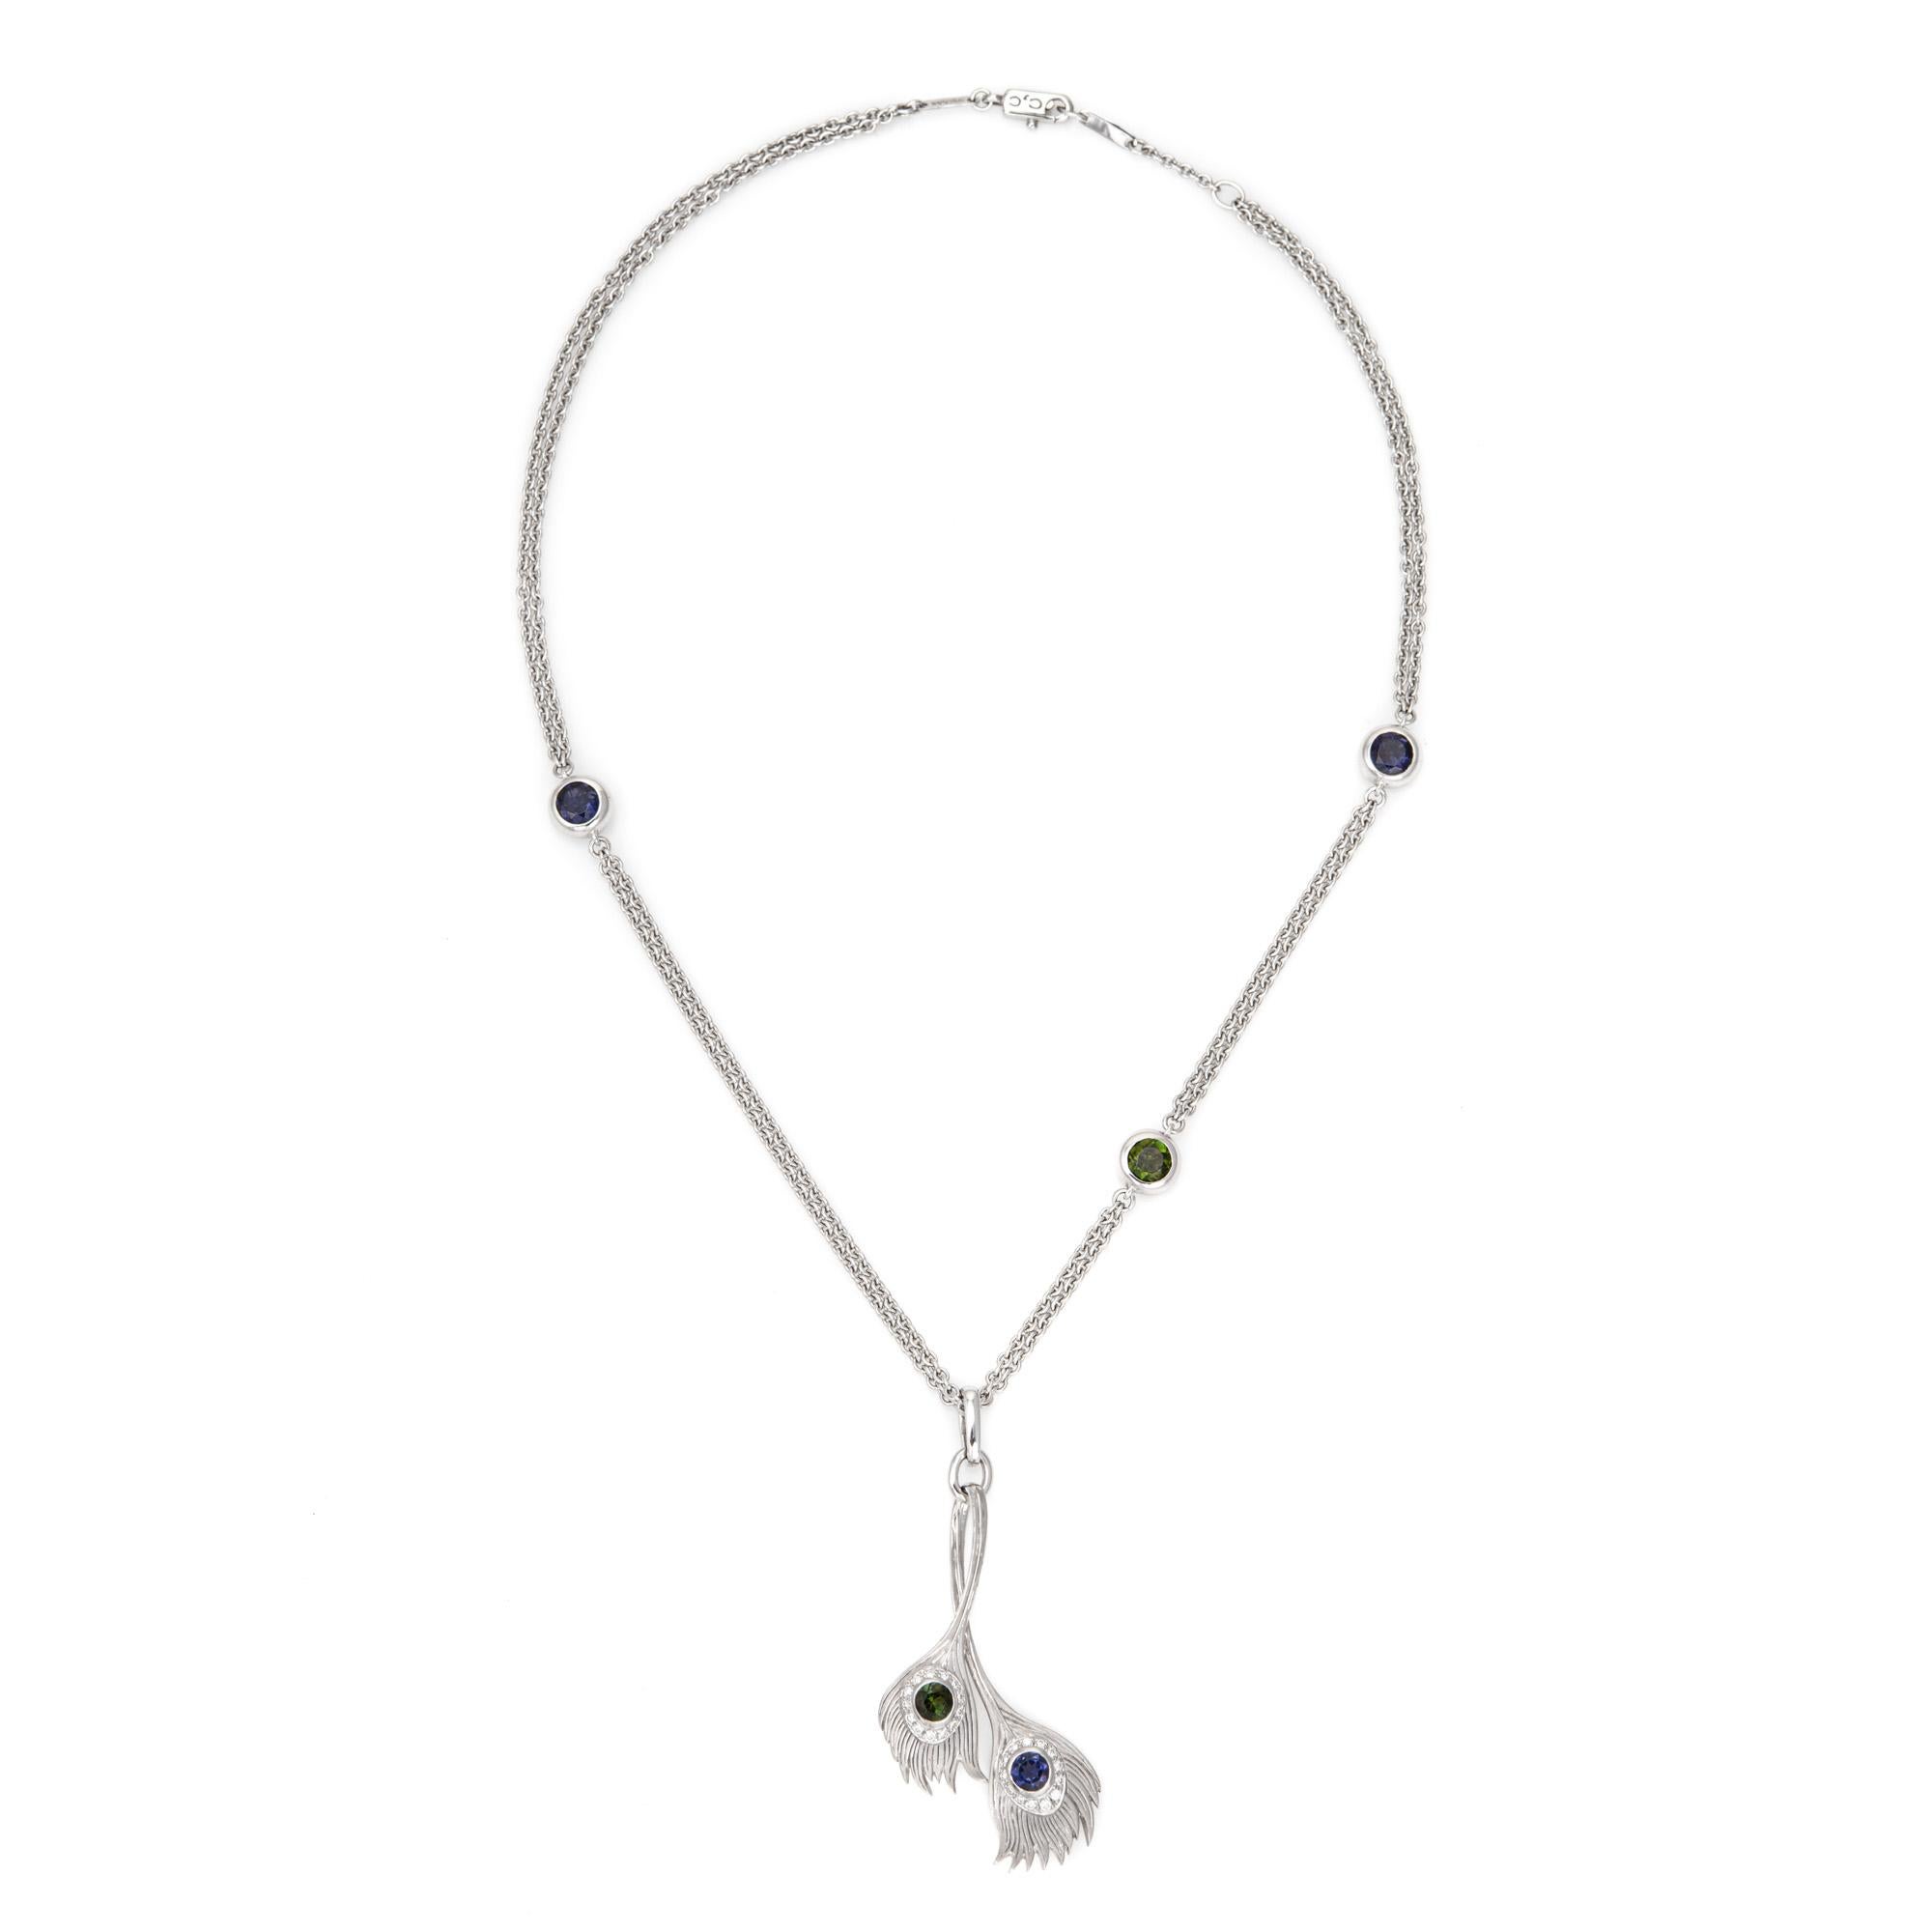 Stylish pre-owned Carrera y Carrera peacock necklace crafted in 18 karat white gold.  

The pendant and chain are set with 4mm iolite and tsavorite garnets. Diamonds total an estimated 0.15 carats (estimated at H-I color and VS2-SI1 clarity). The